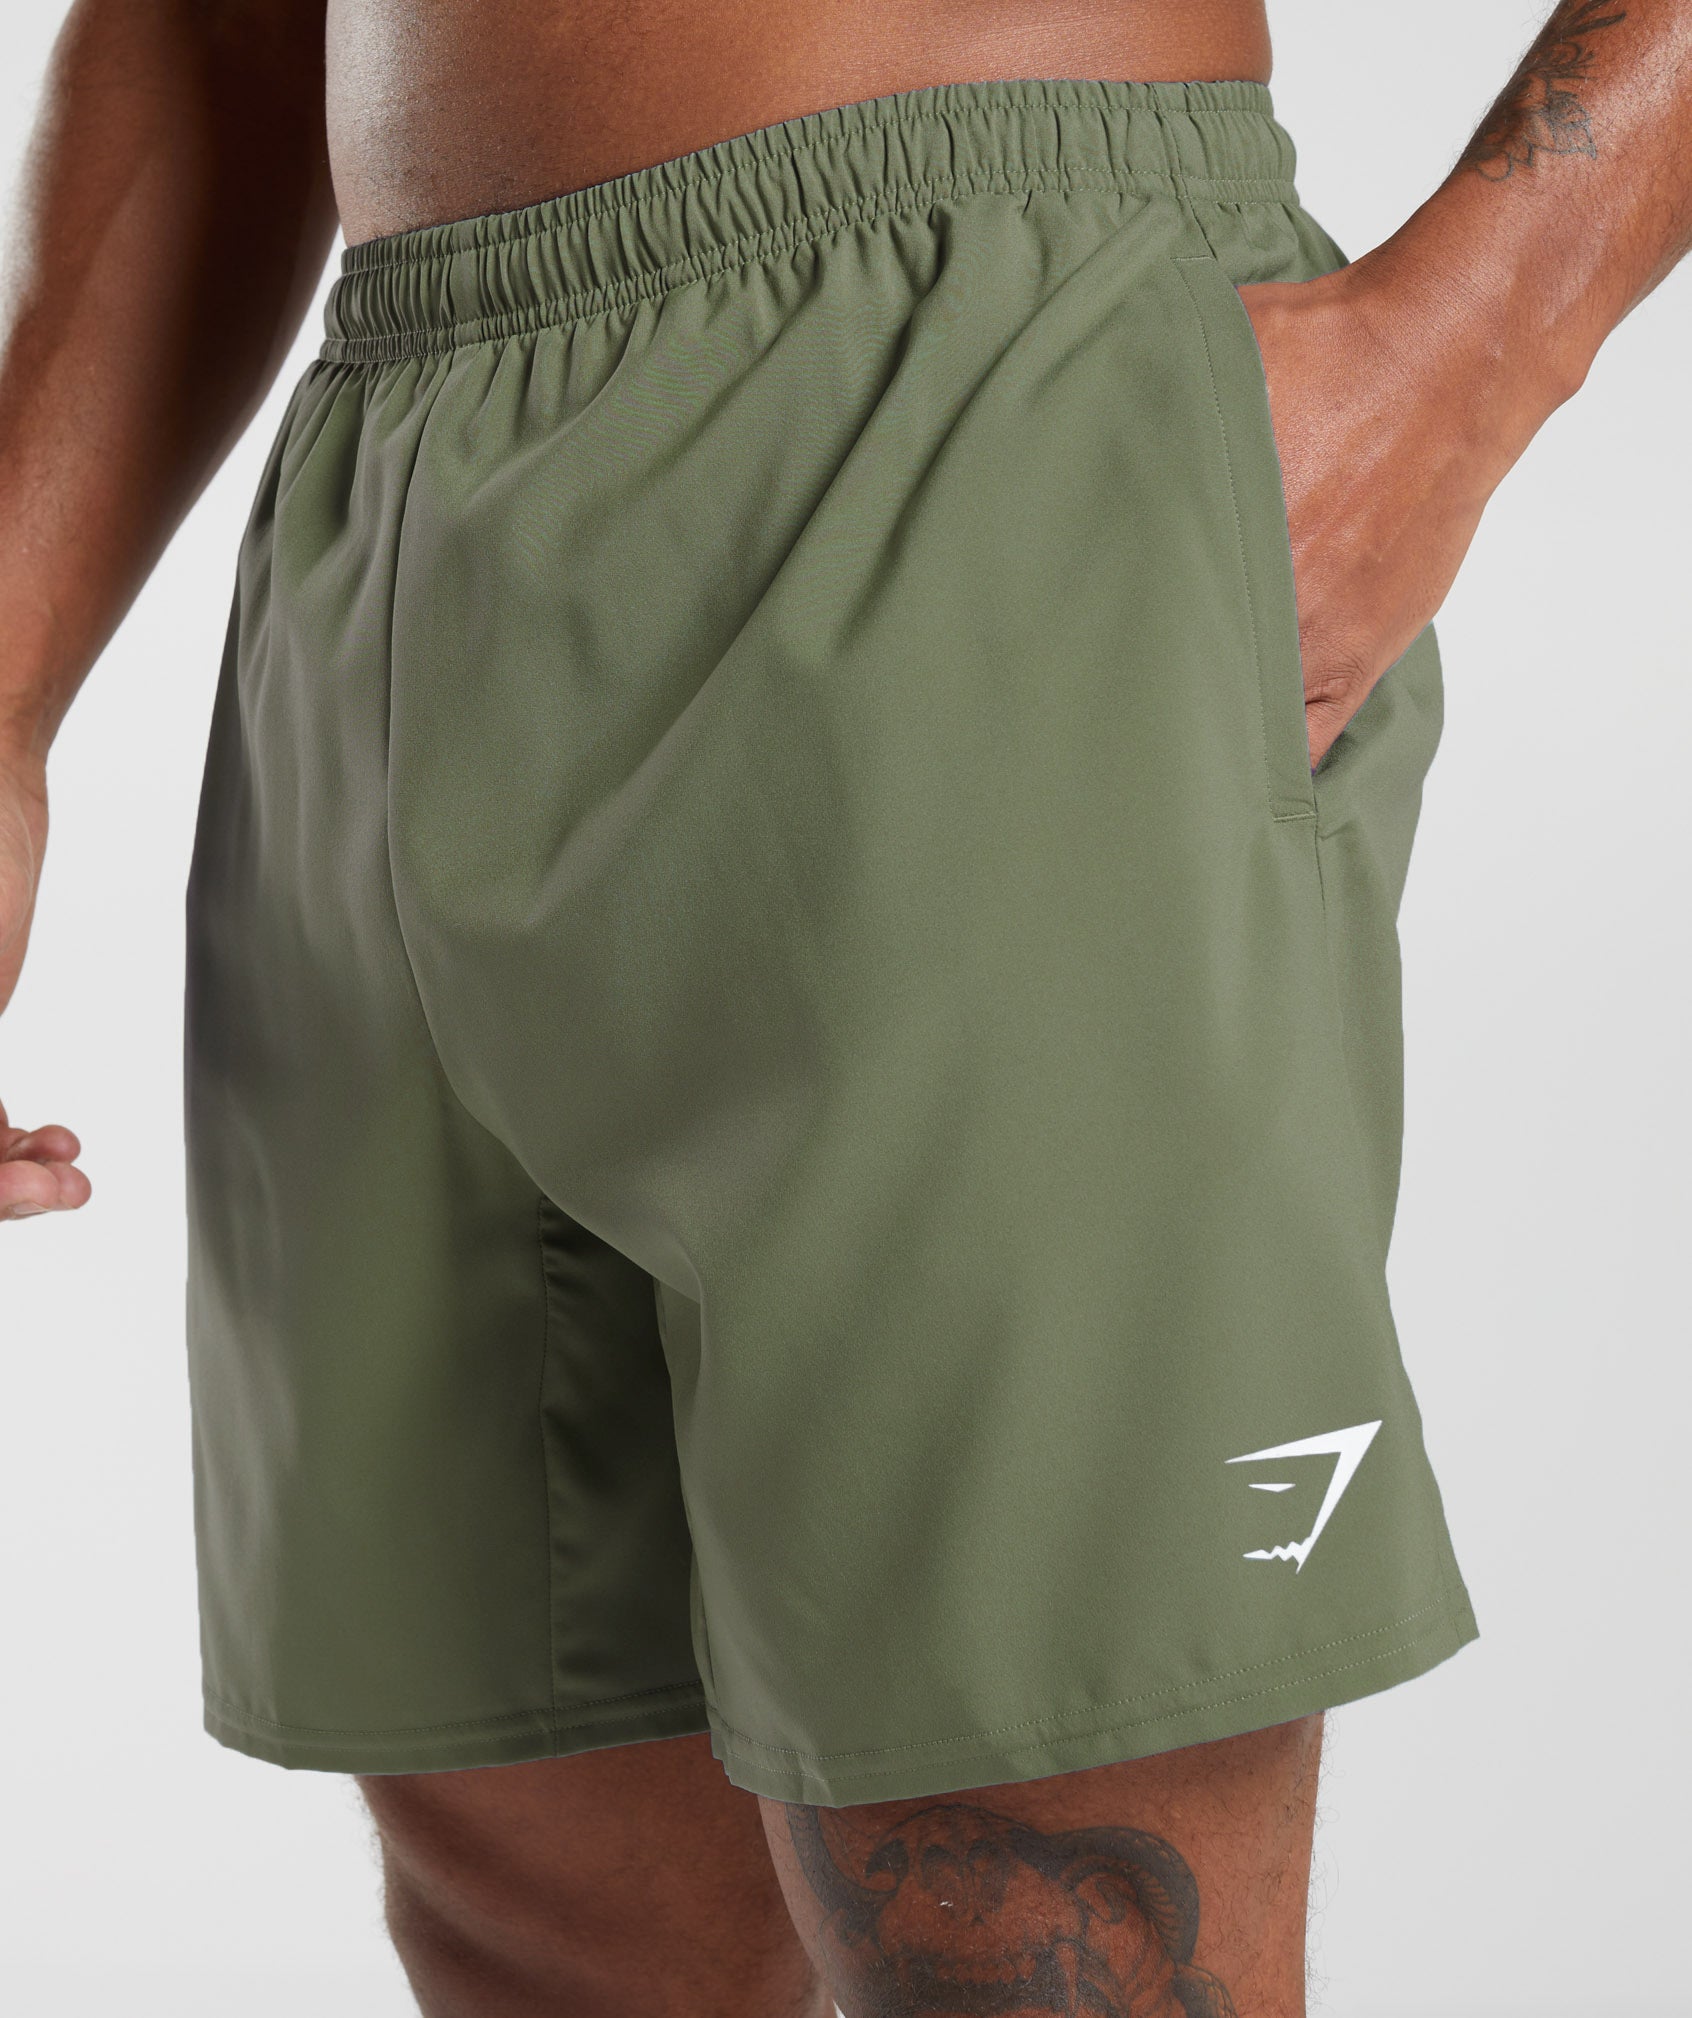 Arrival Shorts in Core Olive - view 3